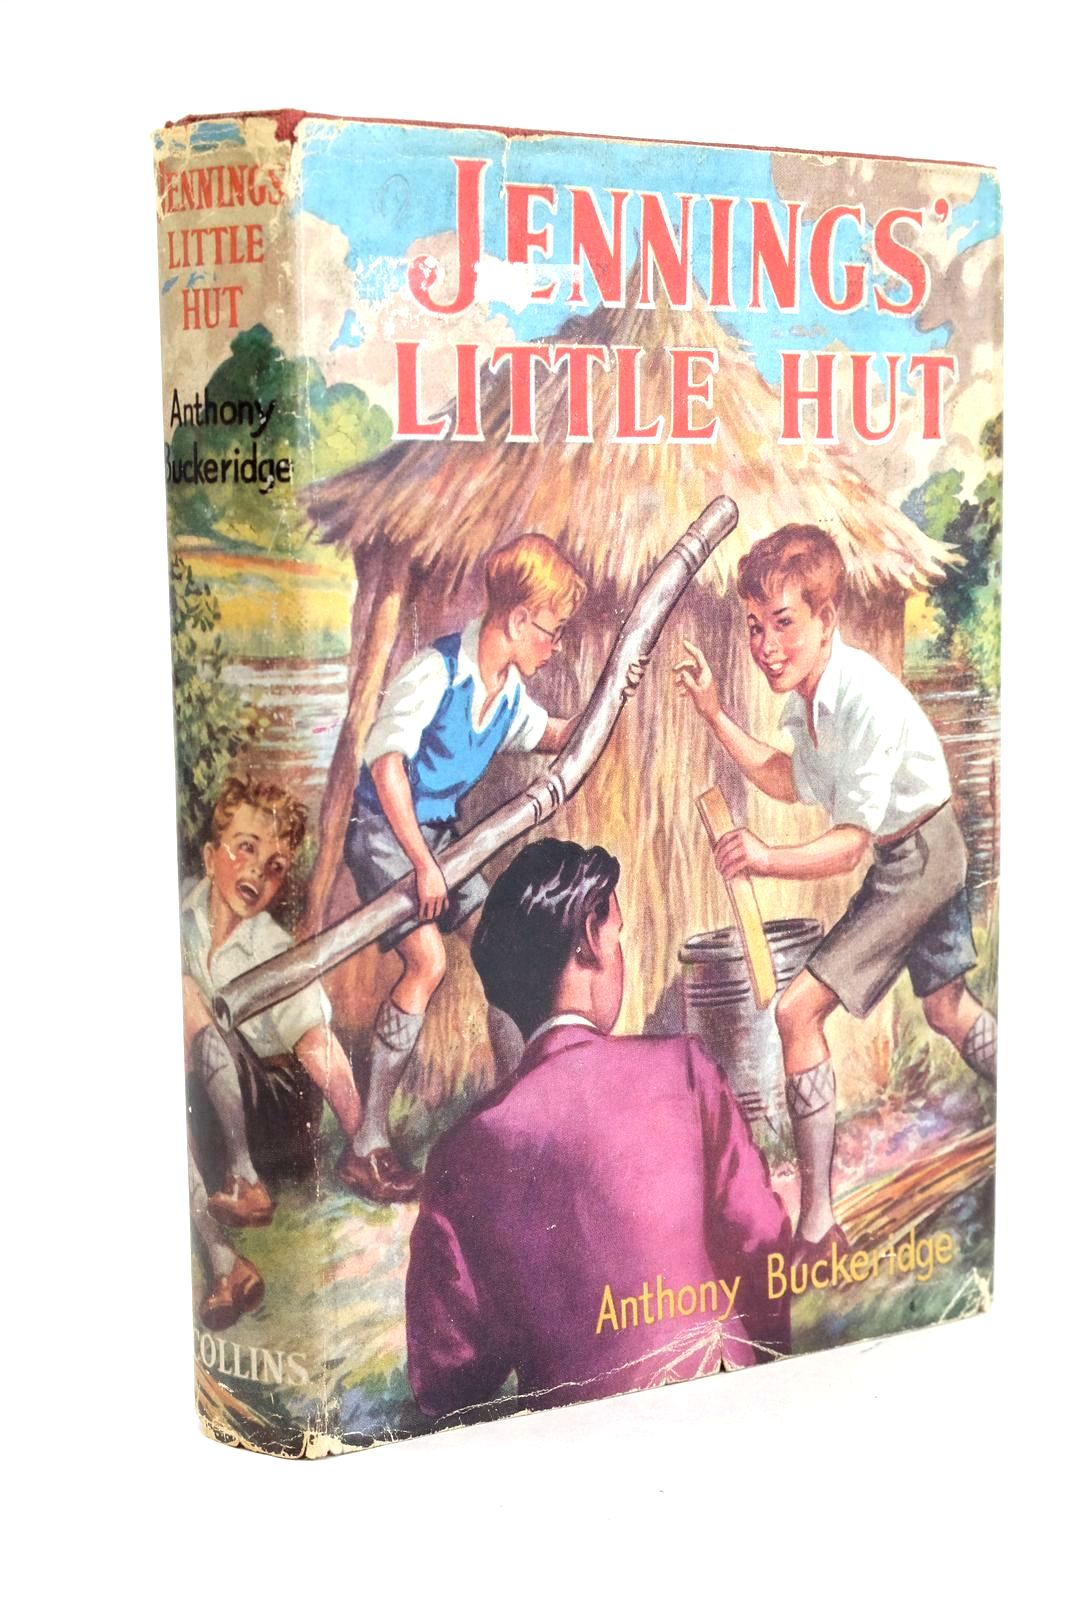 Photo of JENNINGS' LITTLE HUT written by Buckeridge, Anthony published by Collins (STOCK CODE: 1324526)  for sale by Stella & Rose's Books